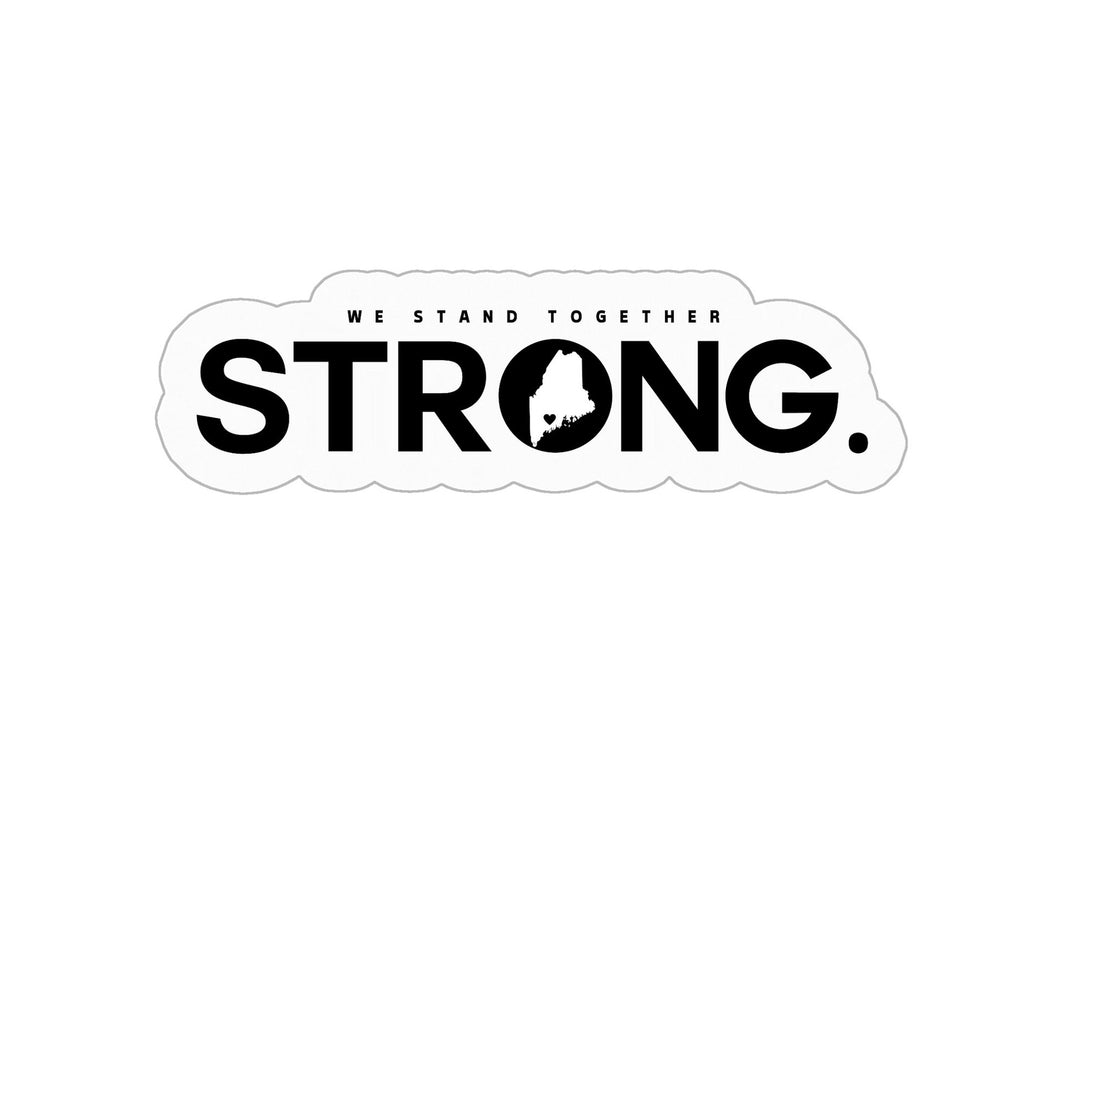 We Stand Together STRONG.  Maine Support Lewiston  6x6 Sticker- ALL proceeds will go to victim funds